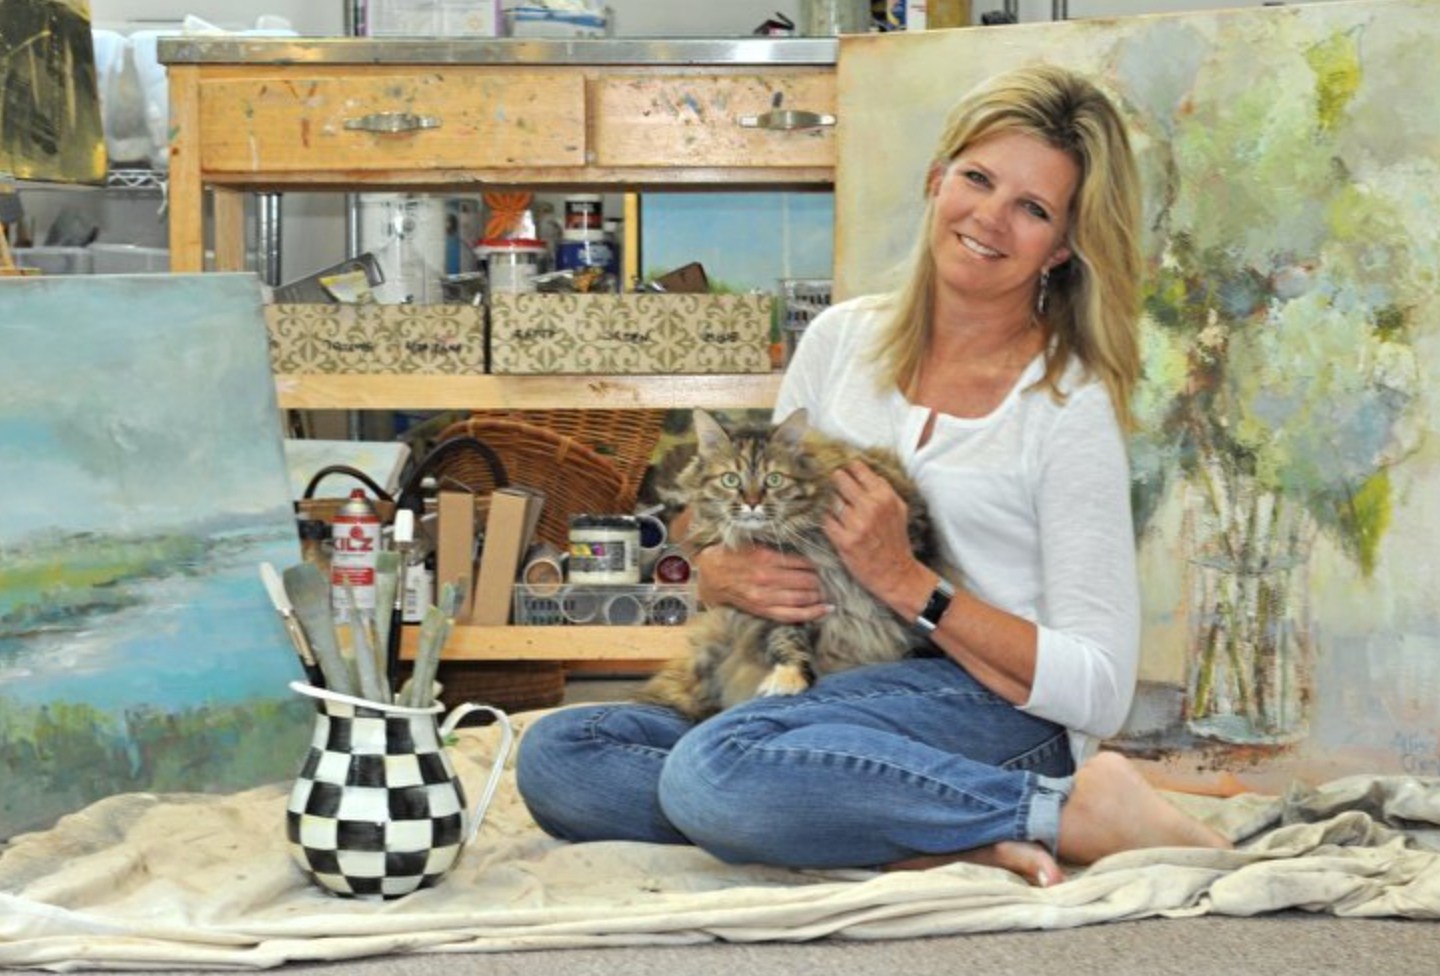 Allison and her painting buddy, Cabi at home in her studio.